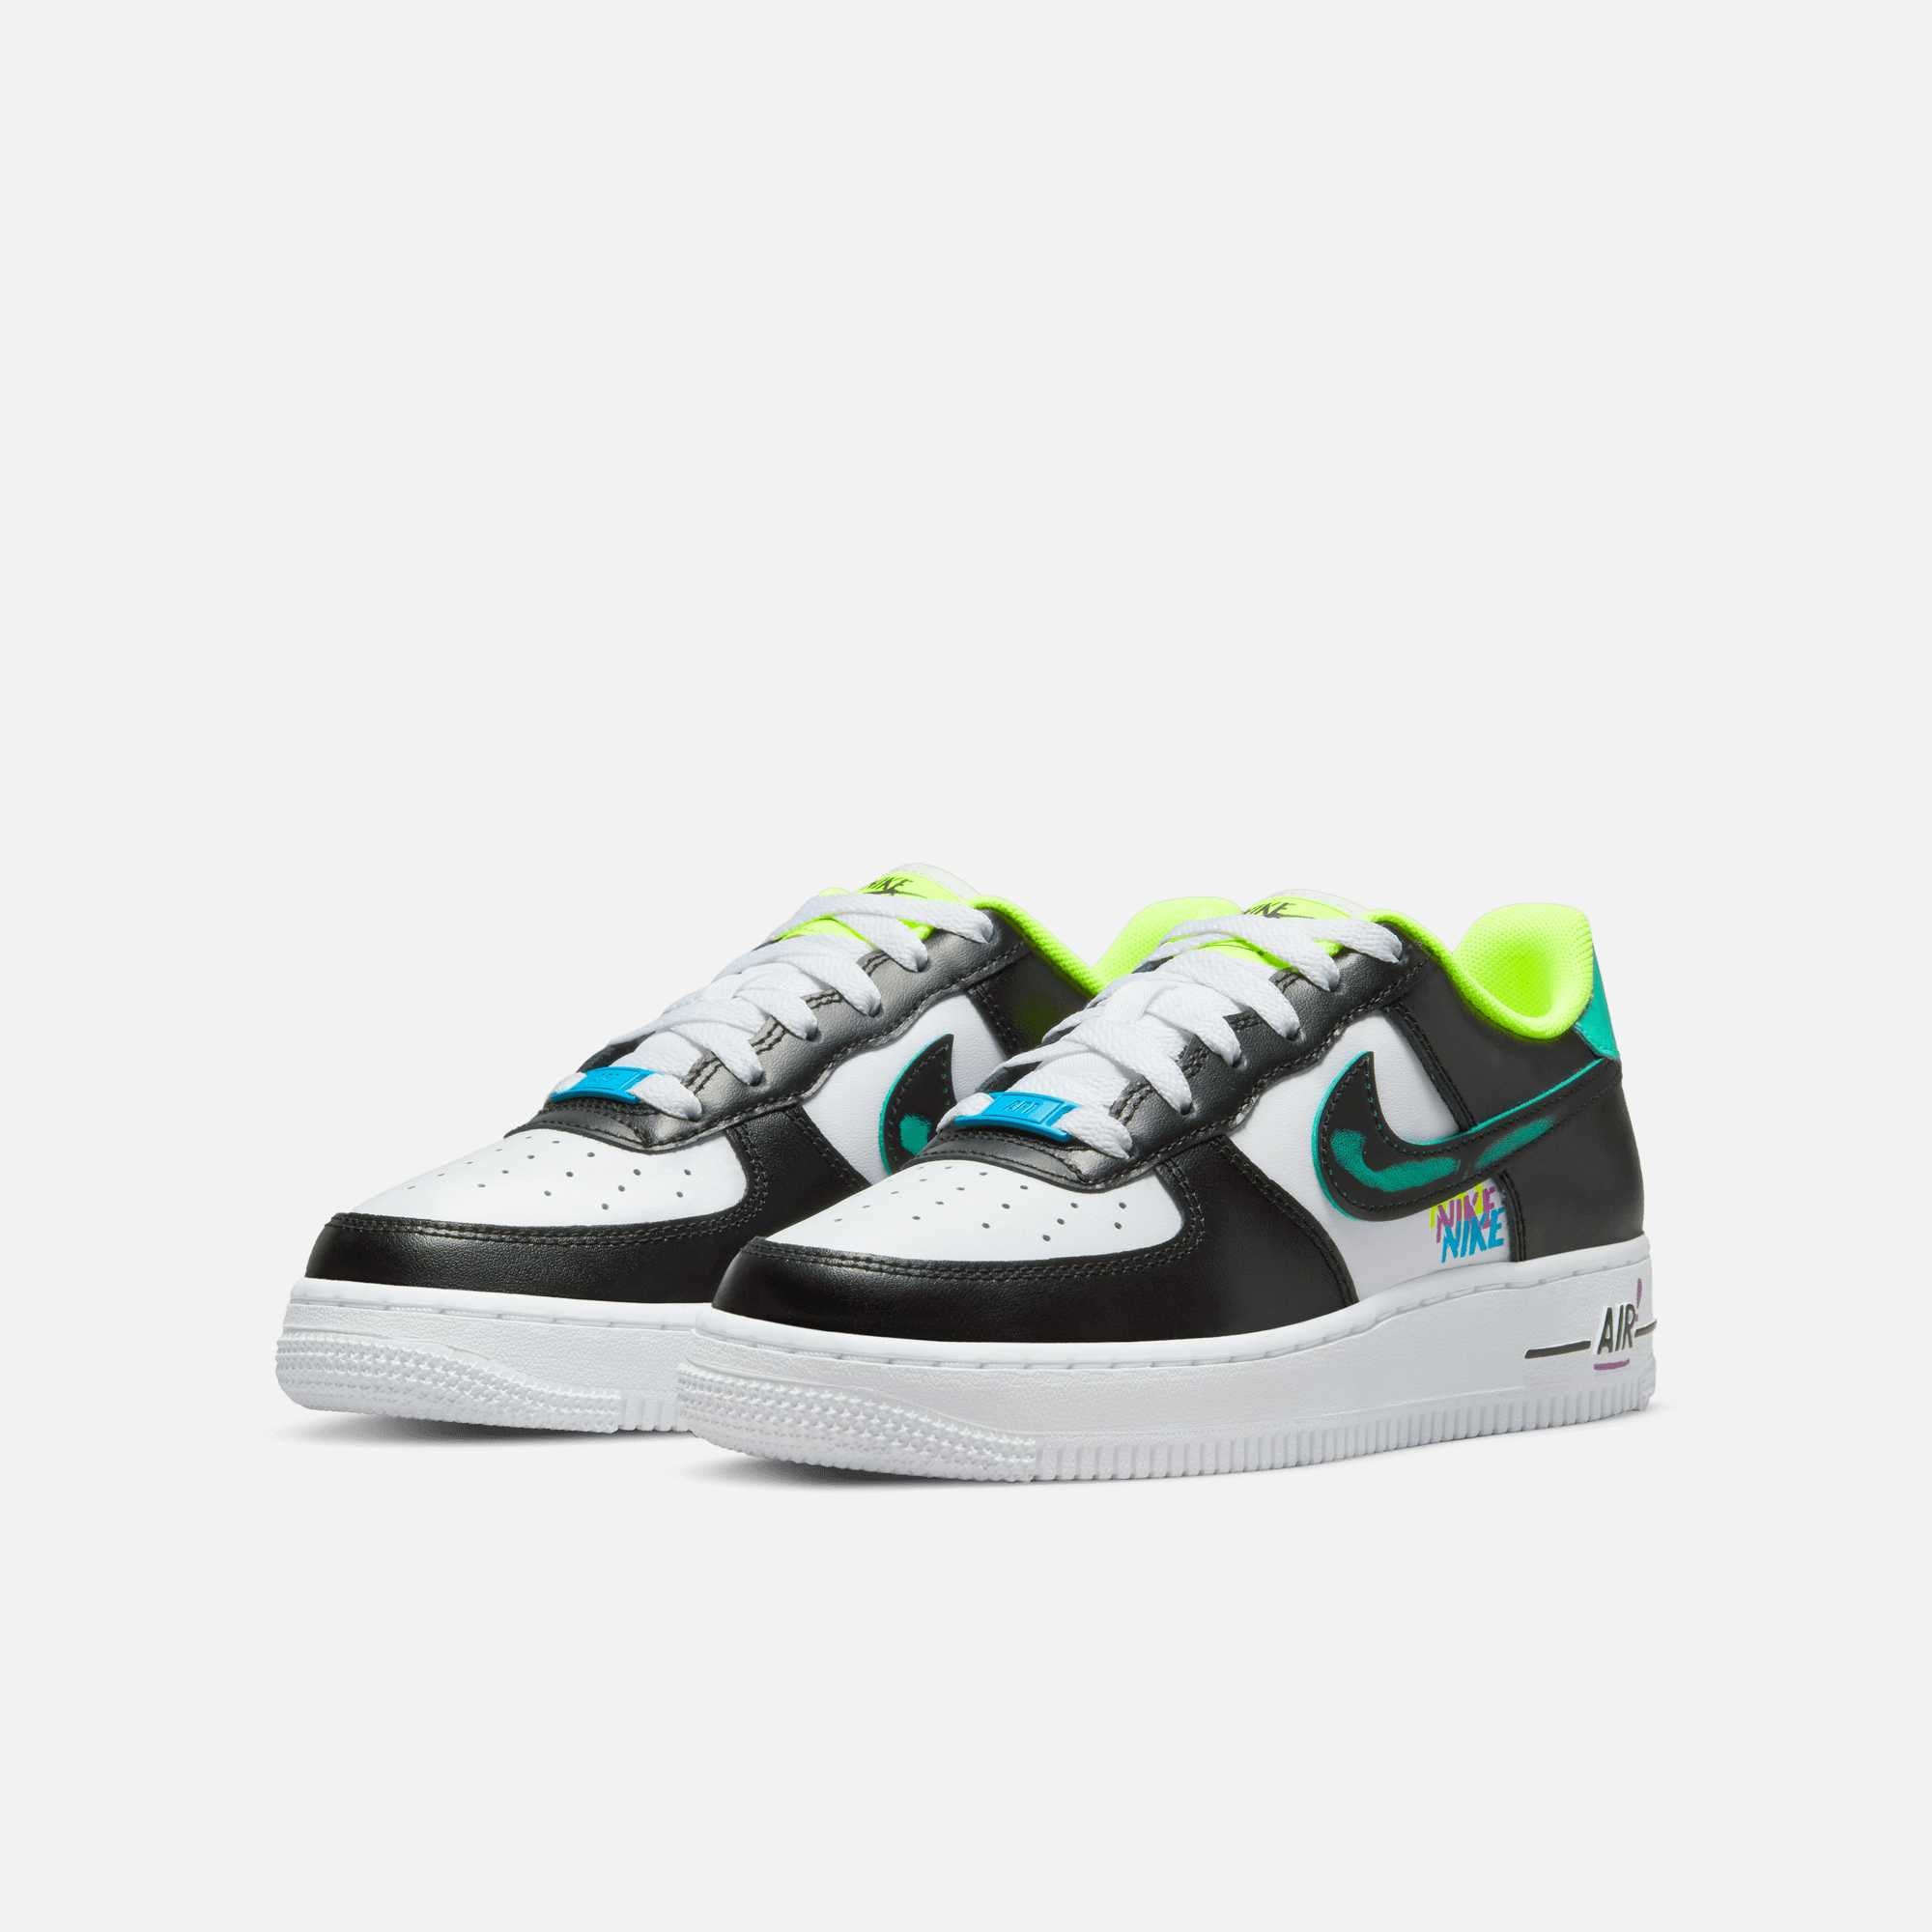 Air force 1 Graffiti for Sale in East Meadow, NY - OfferUp